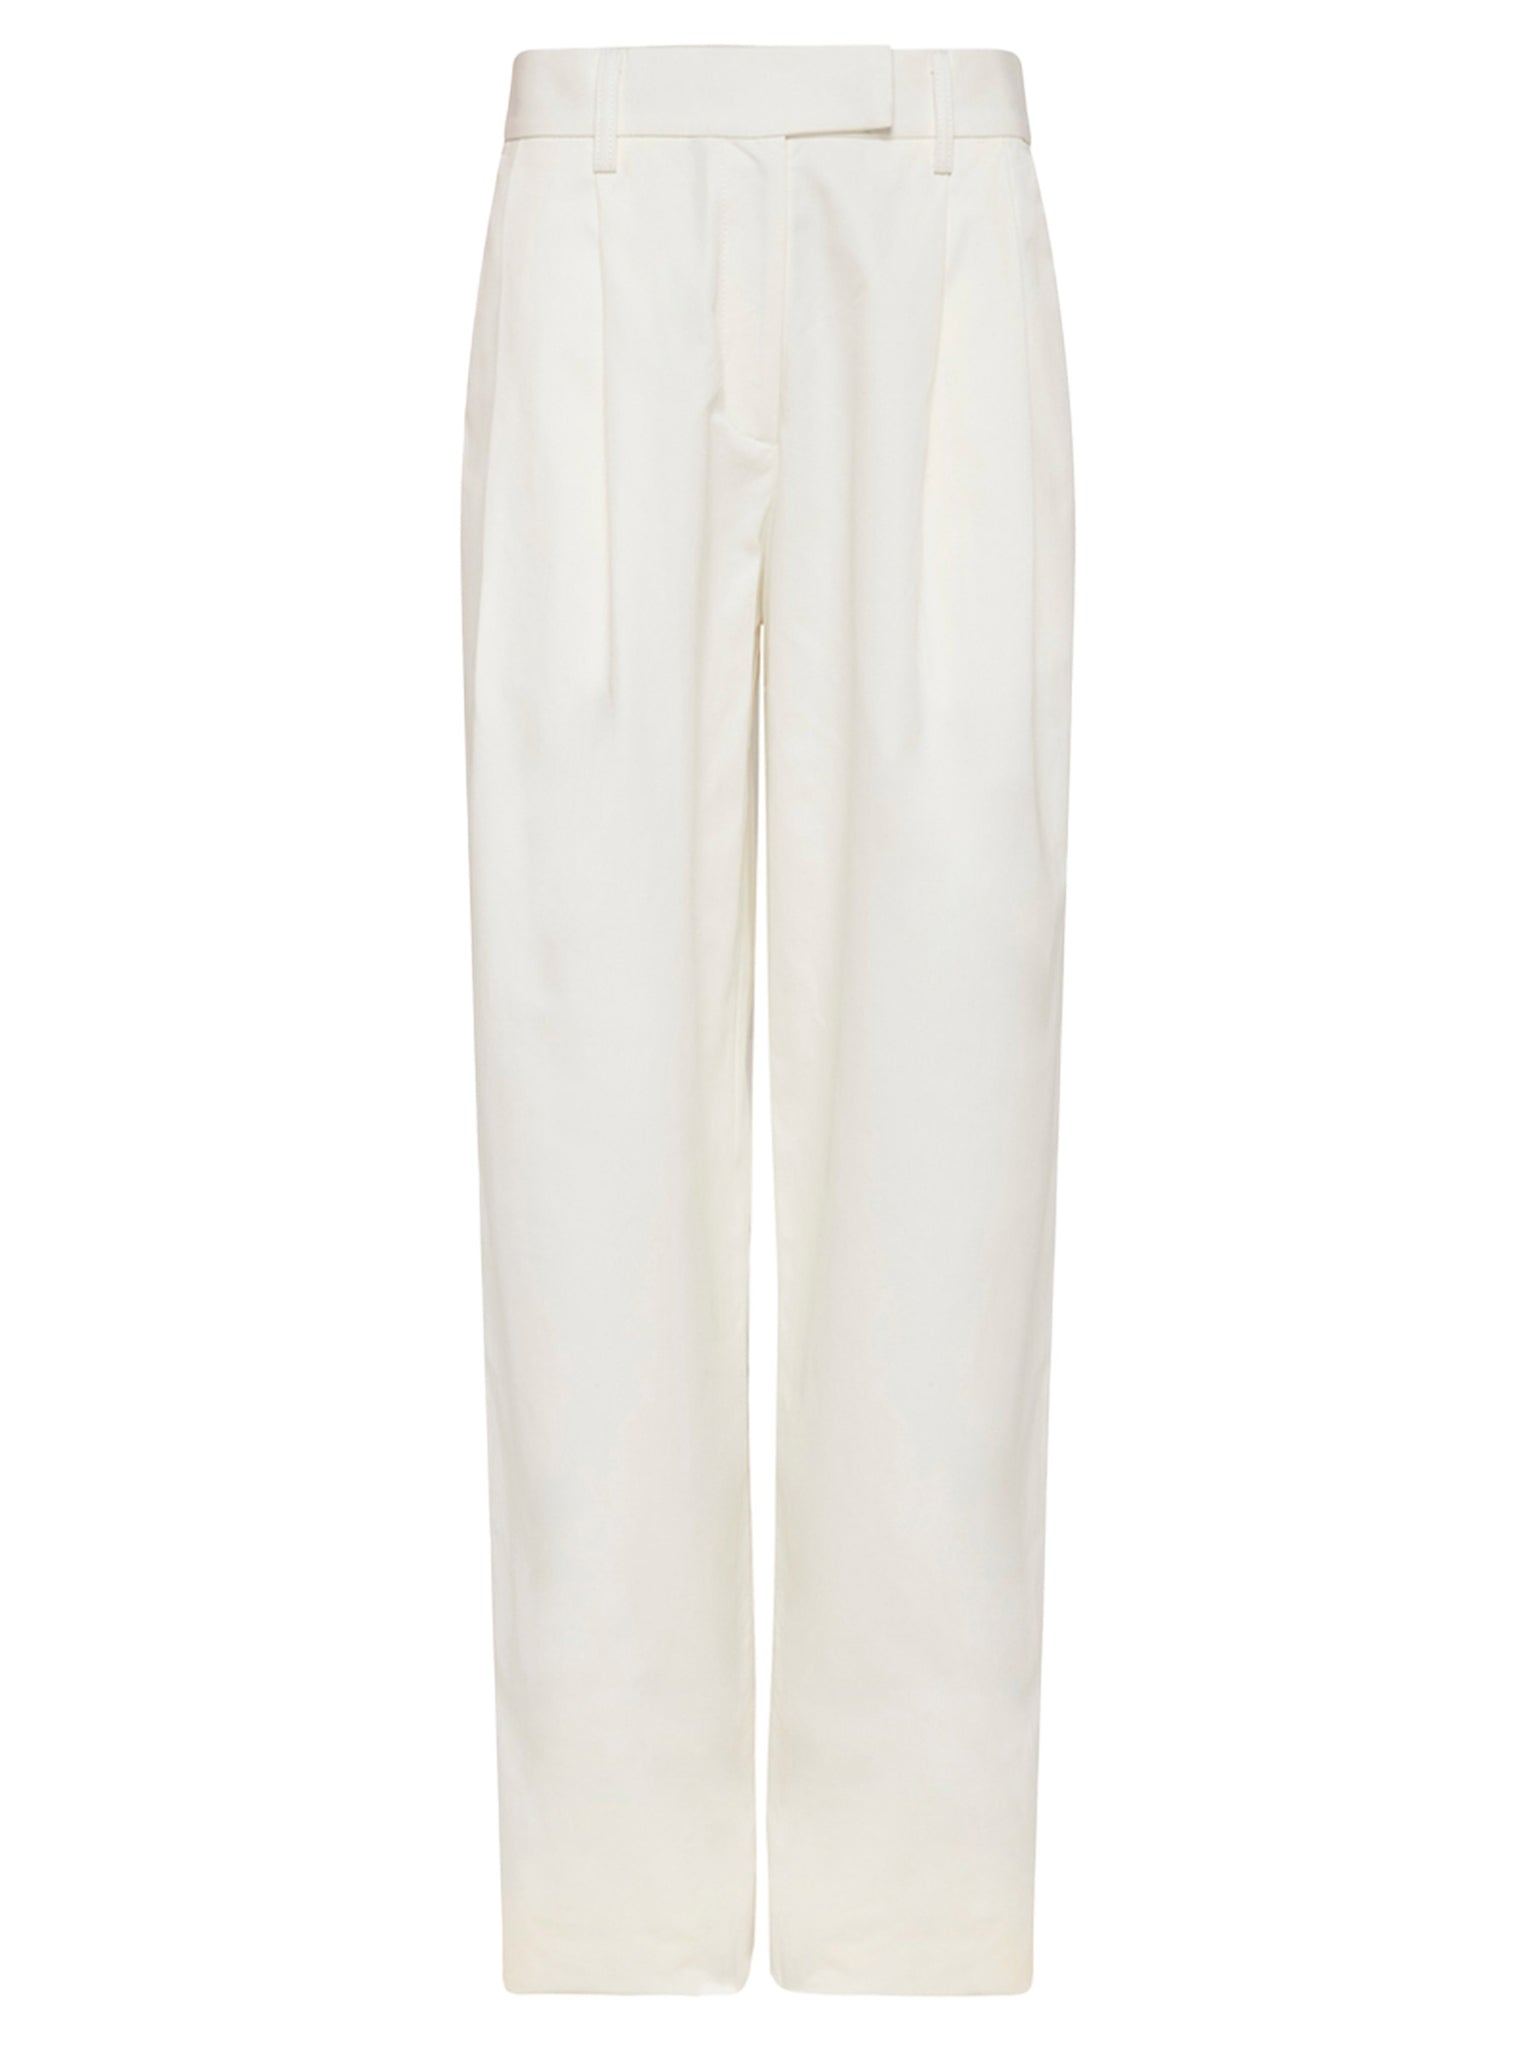 Esse Studios | Tailored Trouser in Ivory | The UNDONE by ESSE Studios